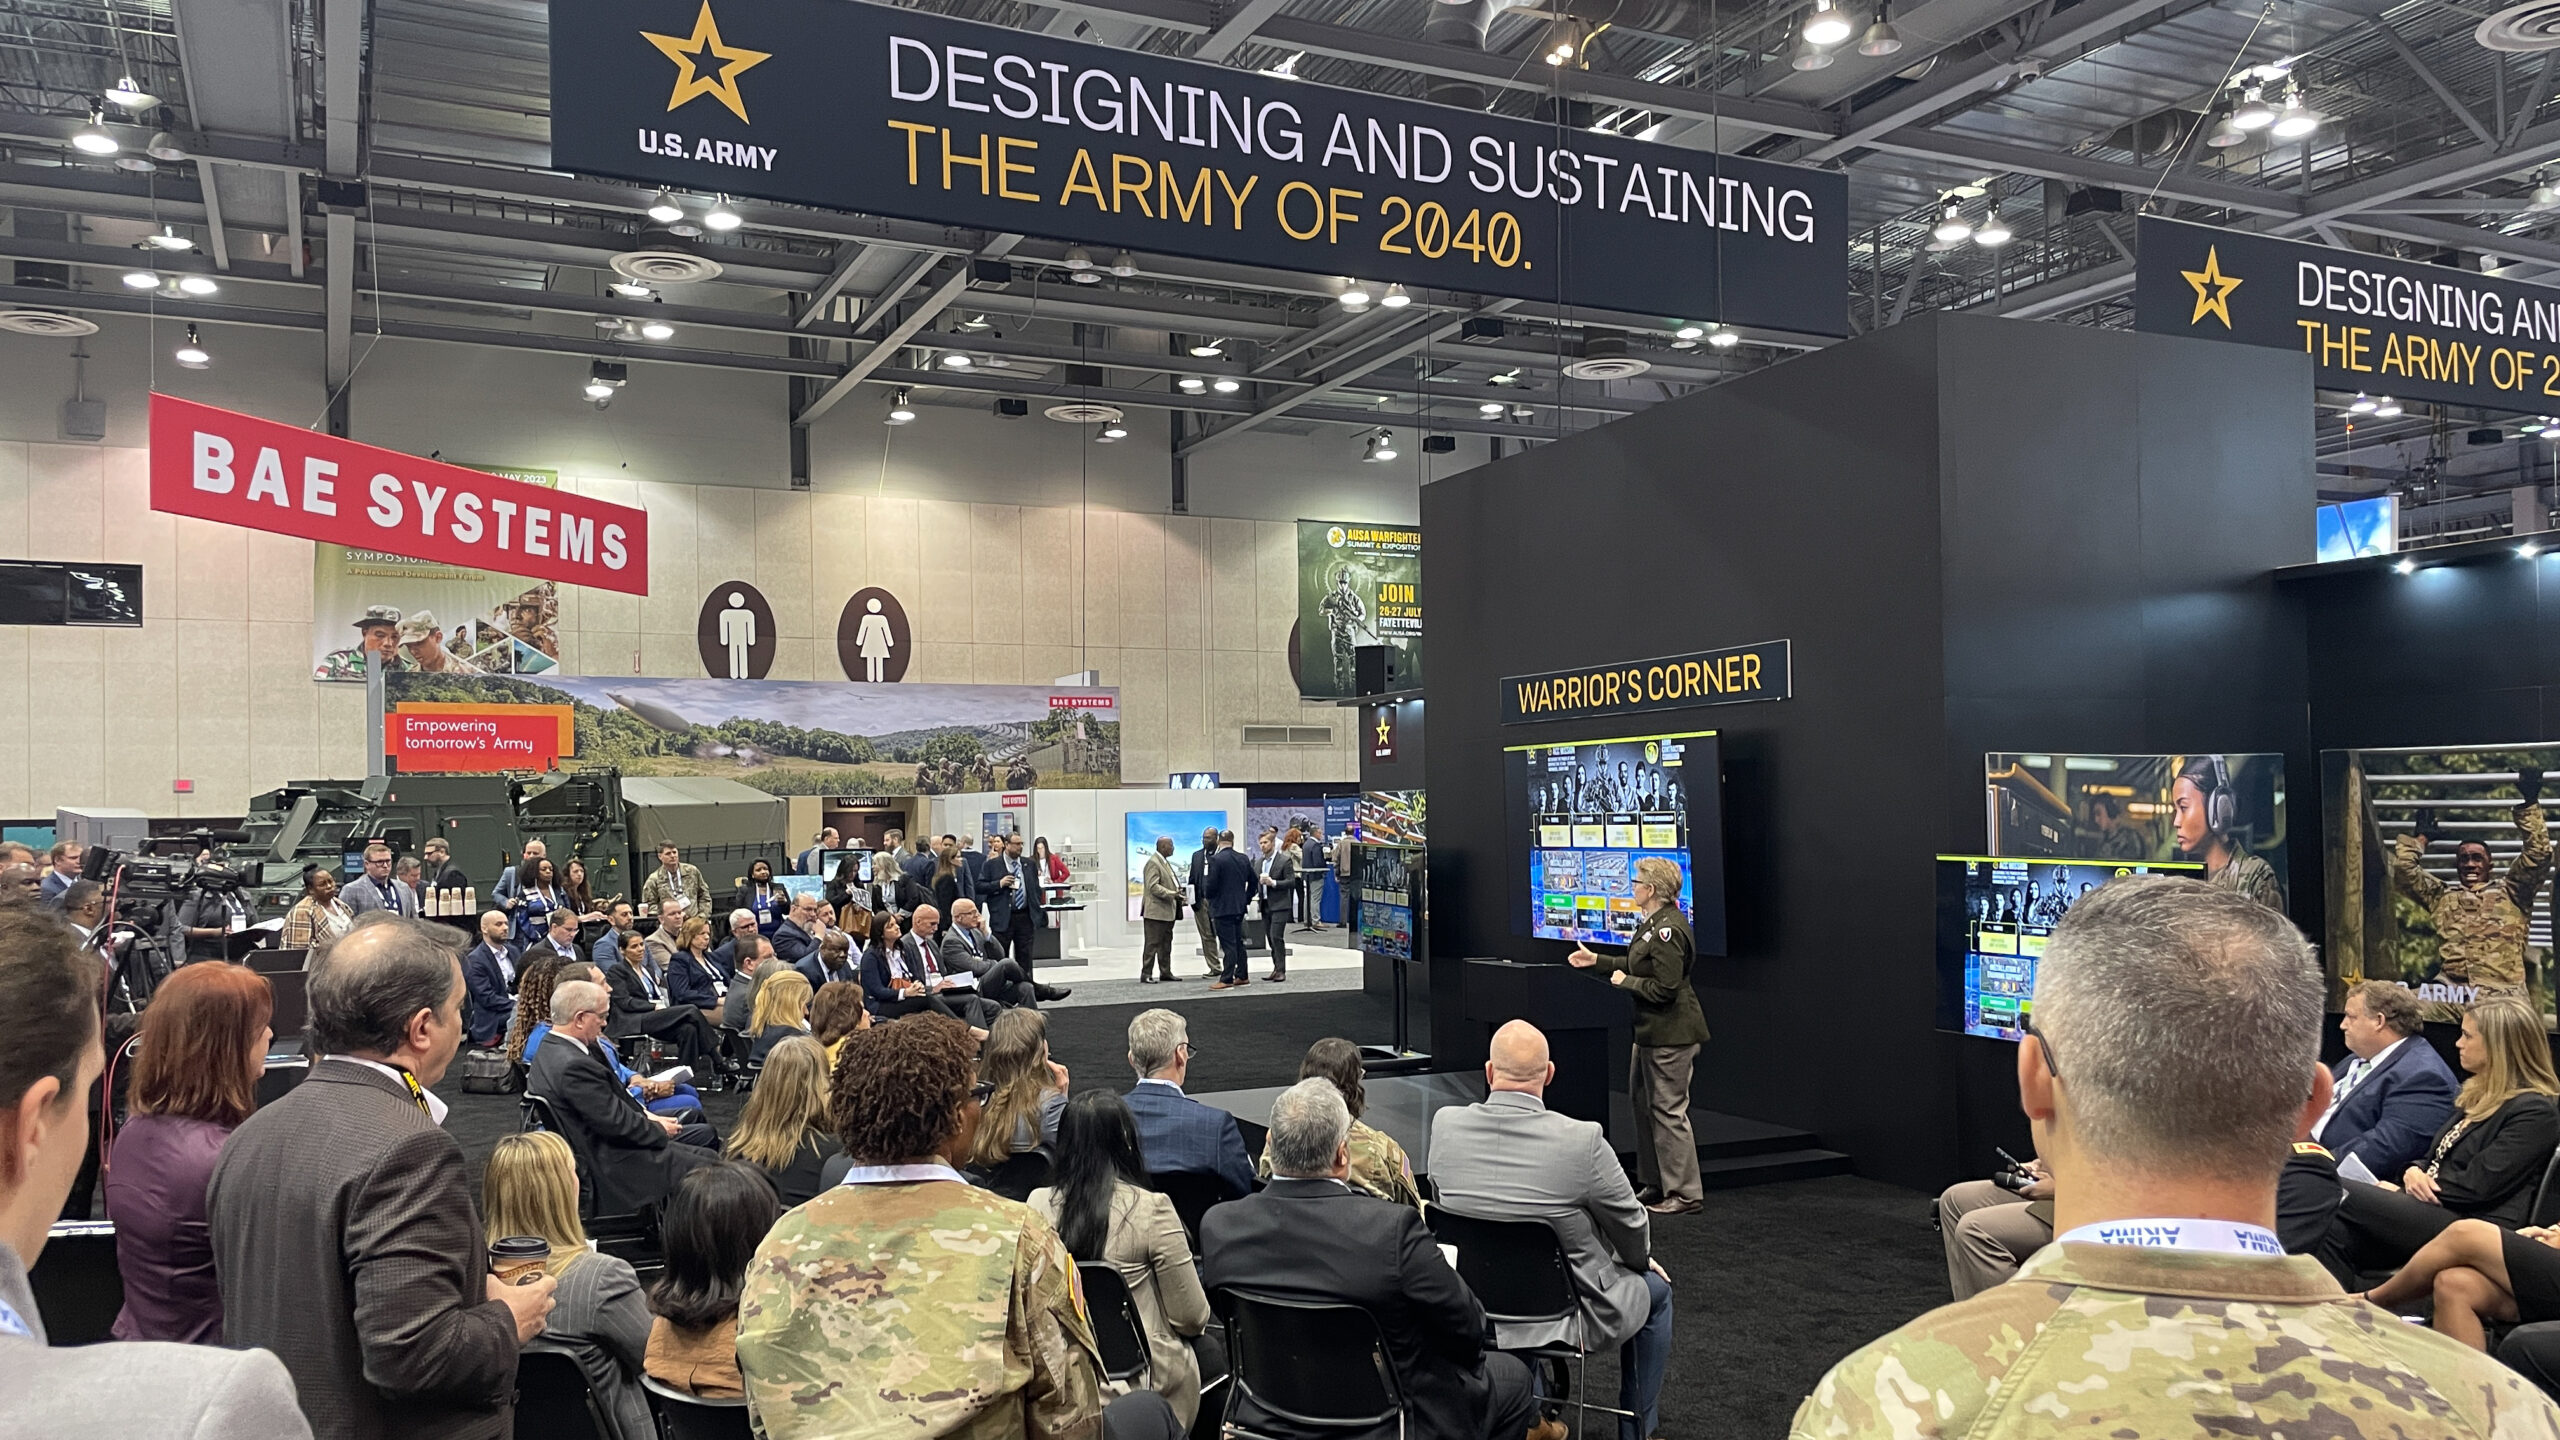 Brigadier General Christine A. Beeler speaks to a large group at the Warriors Corner regarding Army Contracting at AUSA Global Day 2.